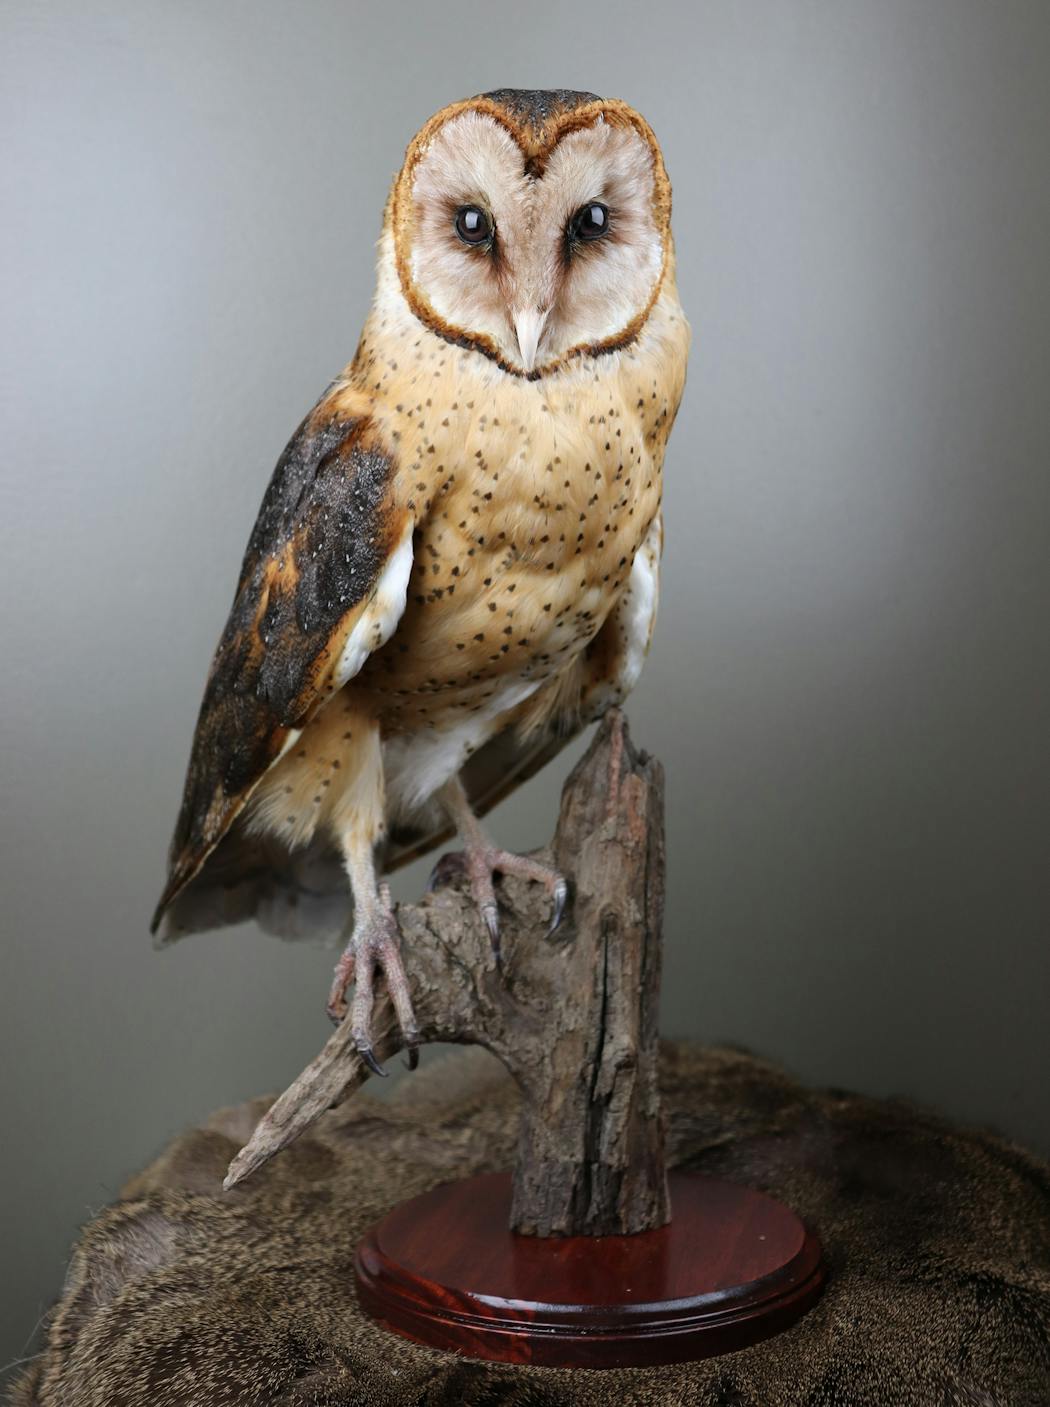 Barn owl mount, which was handled under state and federal salvage permits.